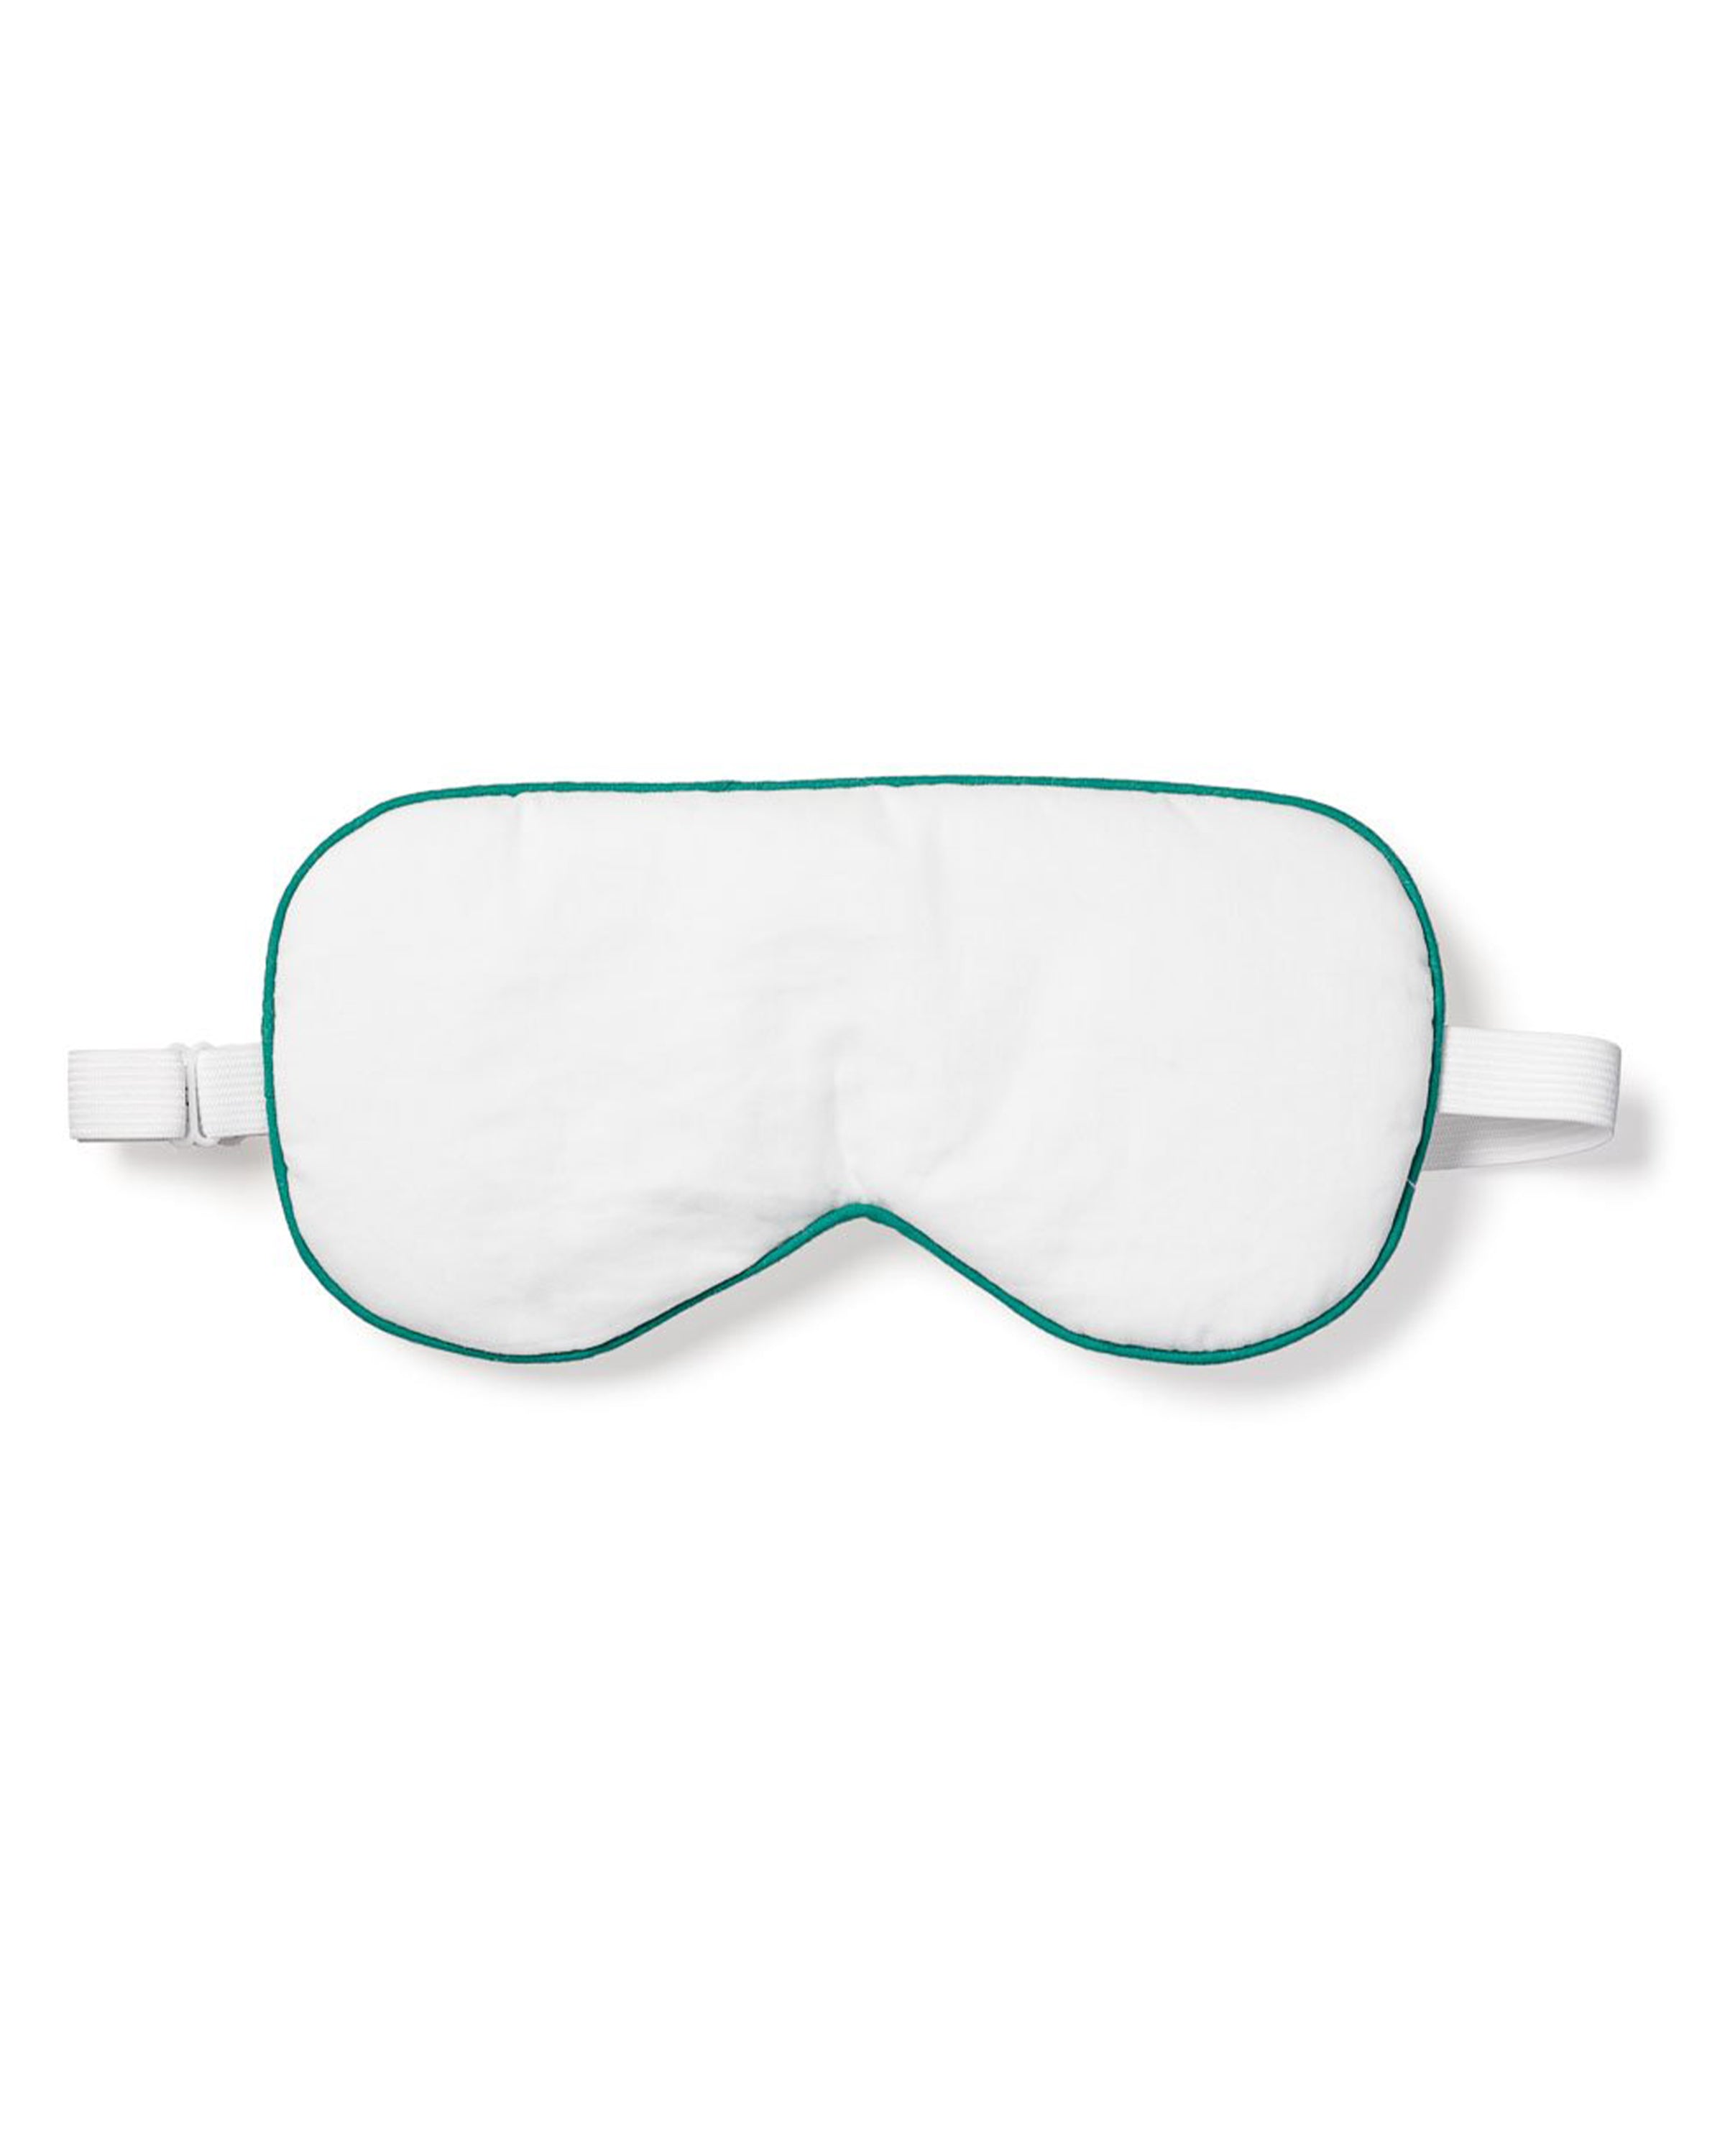 Adult's Sleep Mask in White with Green Piping